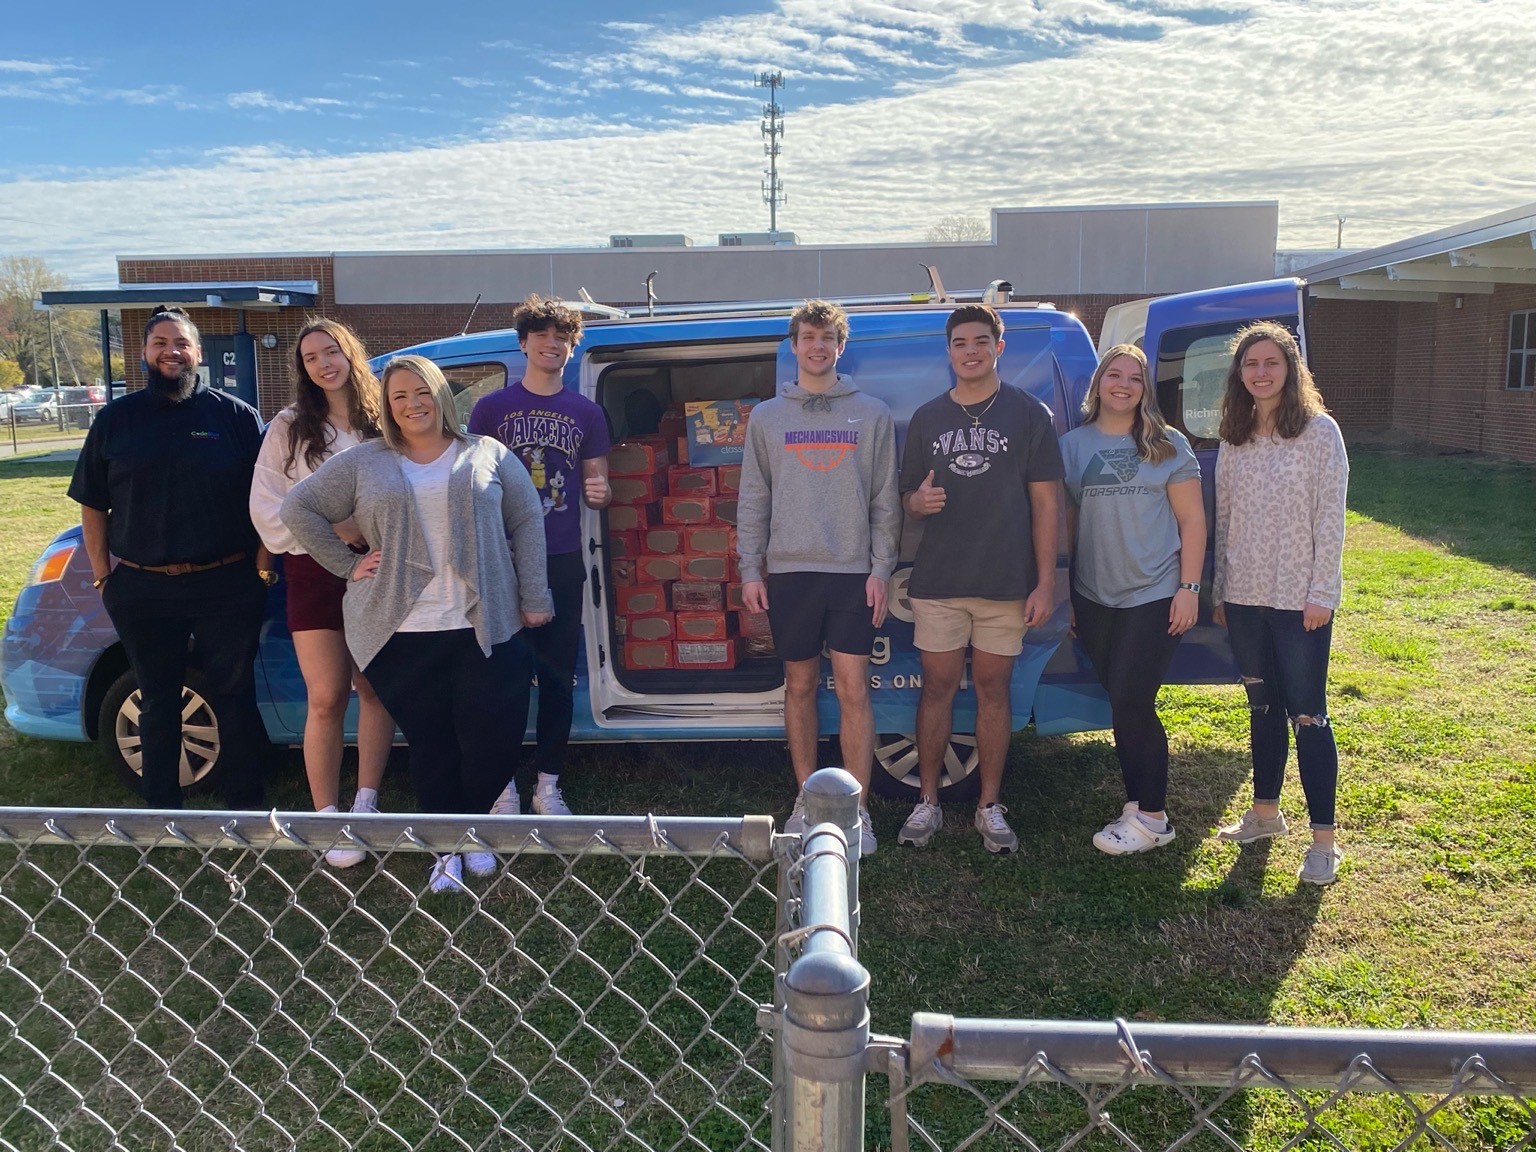 Two CodeBlue employees and several Mechanicsville High School students posed in front of van full of donated food items.